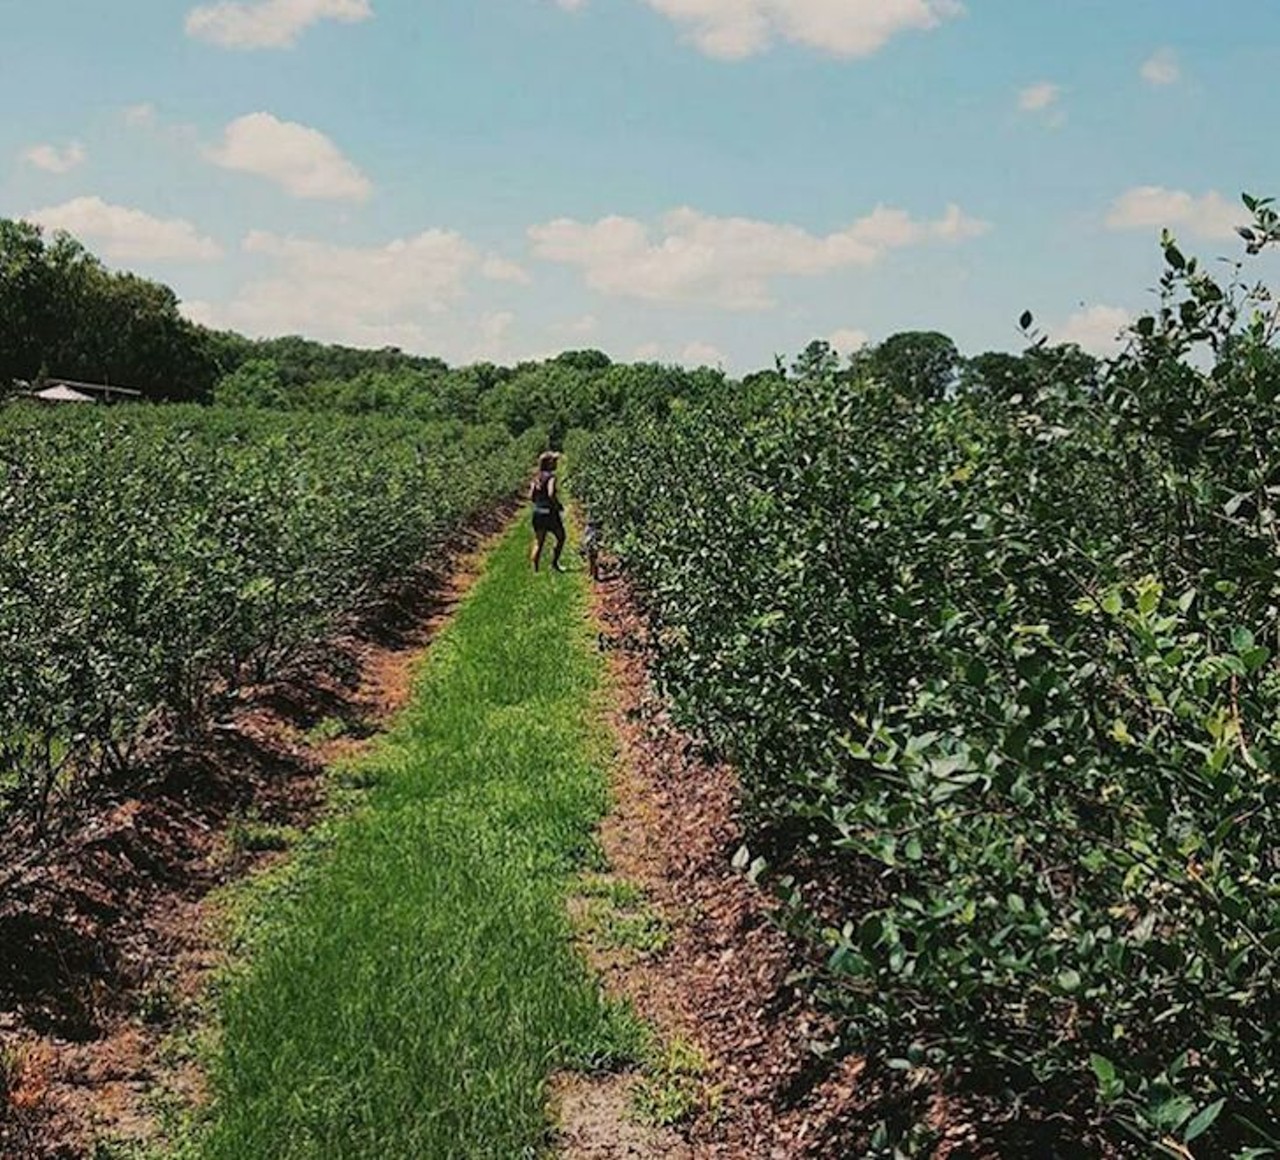 Promise Farms
36111 N. County Rd. 44A., Eustis, 352-408-1988
Buckets provided, holding six to seven pounds, you can fill &#145;er up or pay $5 per pound at this blueberry farm. Hours and days are subject to change based on weather or other circumstances, so be sure to call ahead or check out their Facebook.
Distance from Orlando: 46 minutes
Photo via shelbysusannahrewis/Instagram